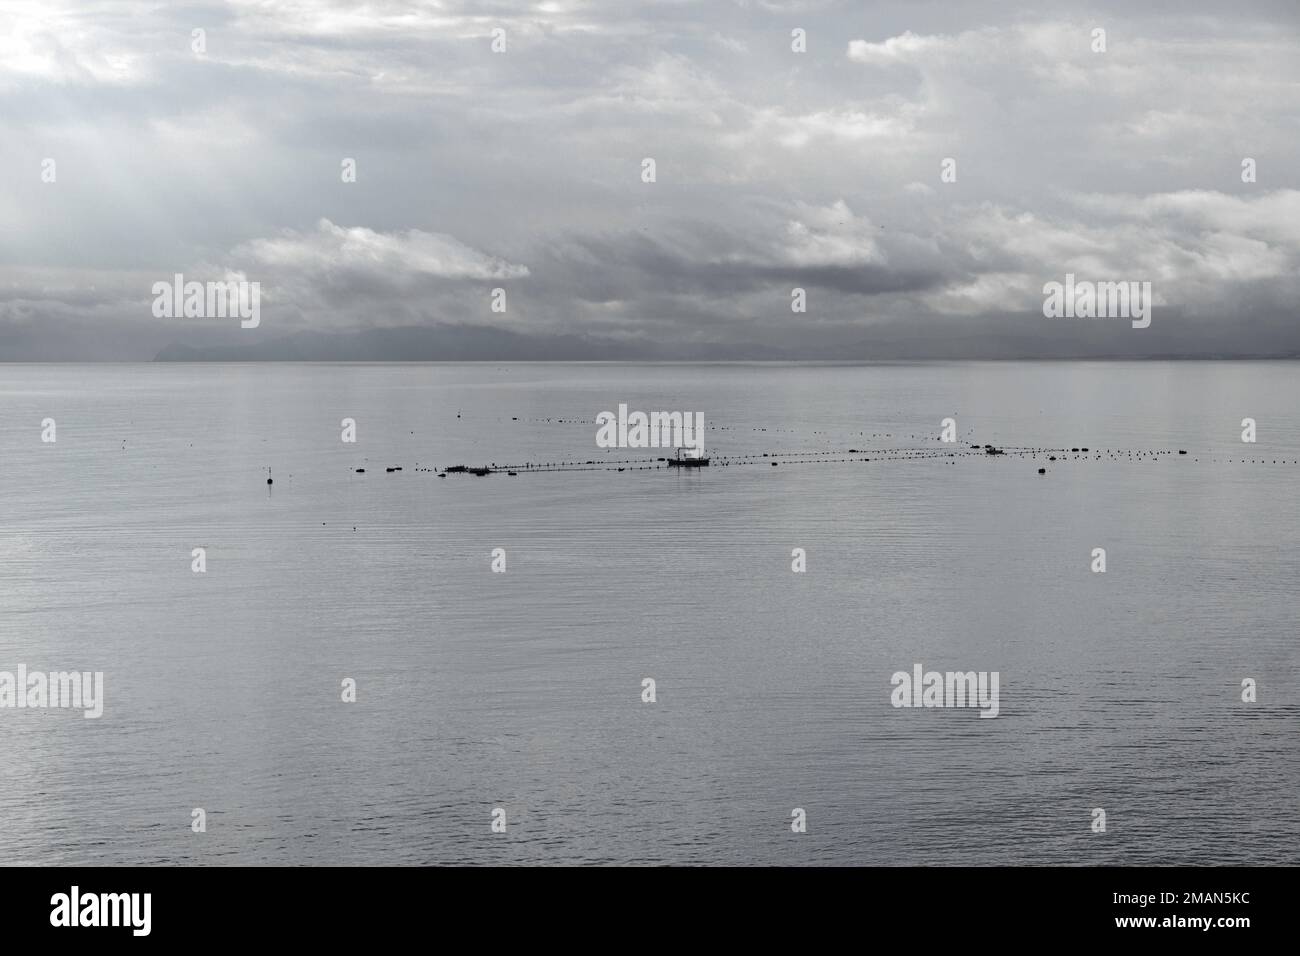 Seascape with boats fishing in the Almadraba of Ceuta, Spain, on a cloudy day. Stock Photo